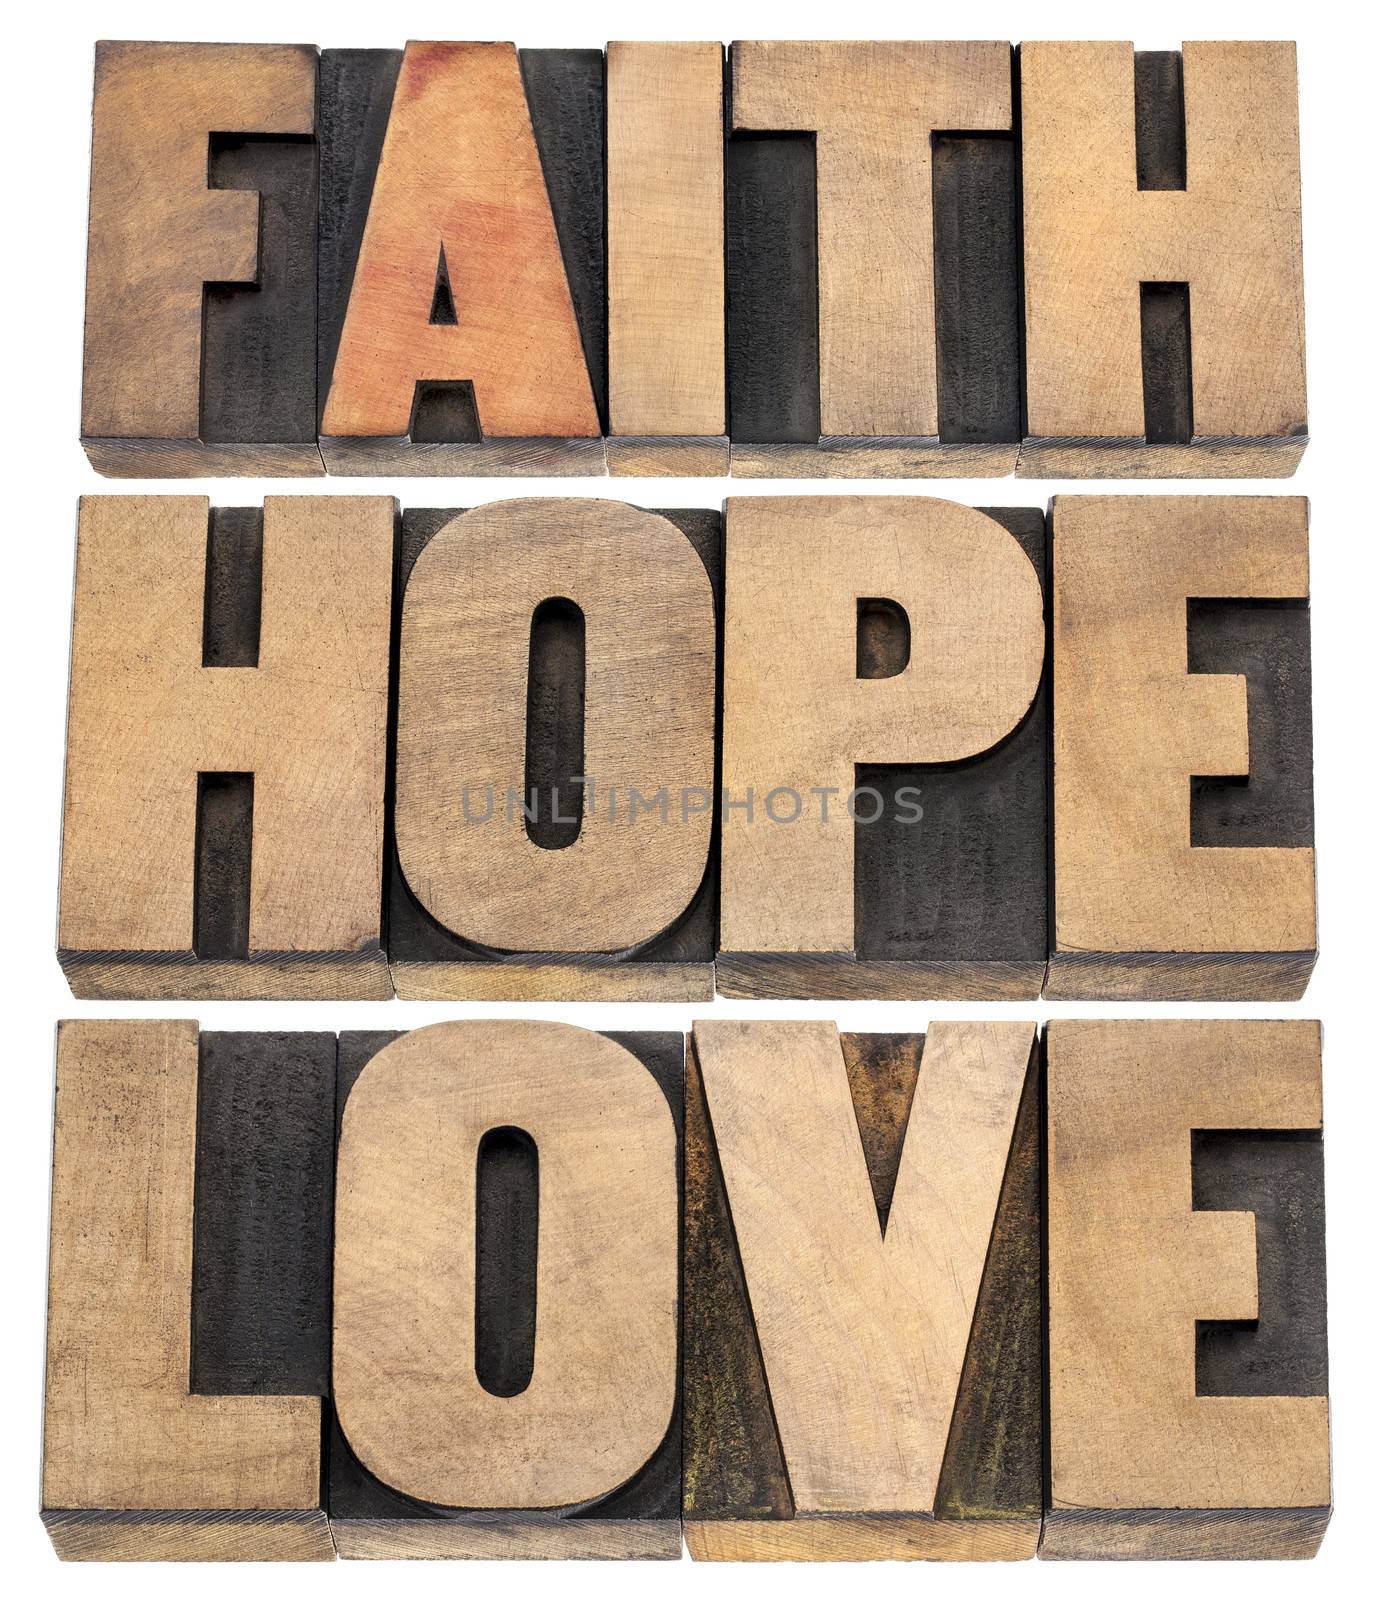 faith, hope and love typography by PixelsAway